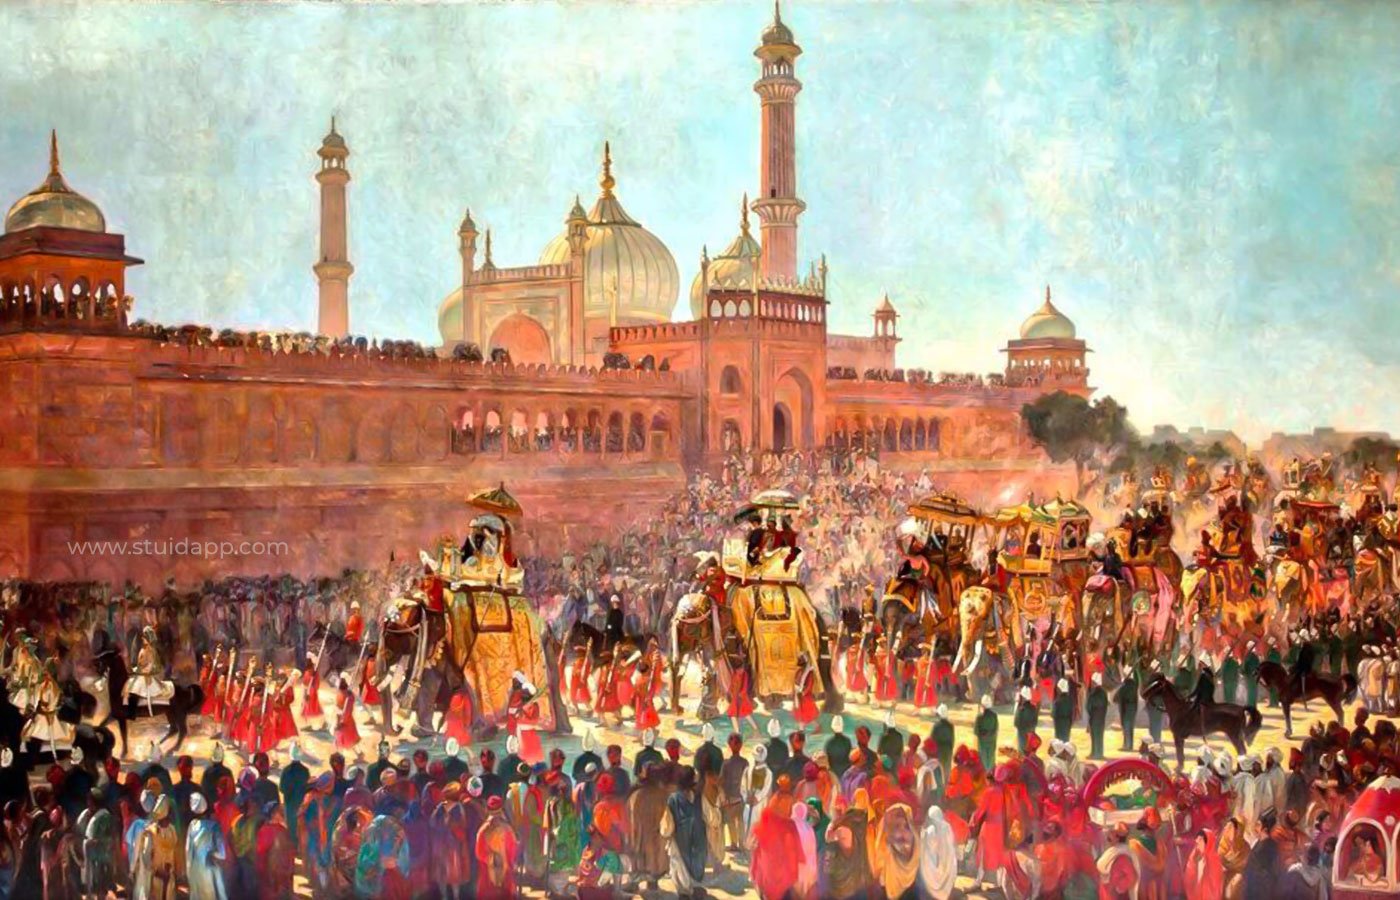 The History of Mughal Empire in India